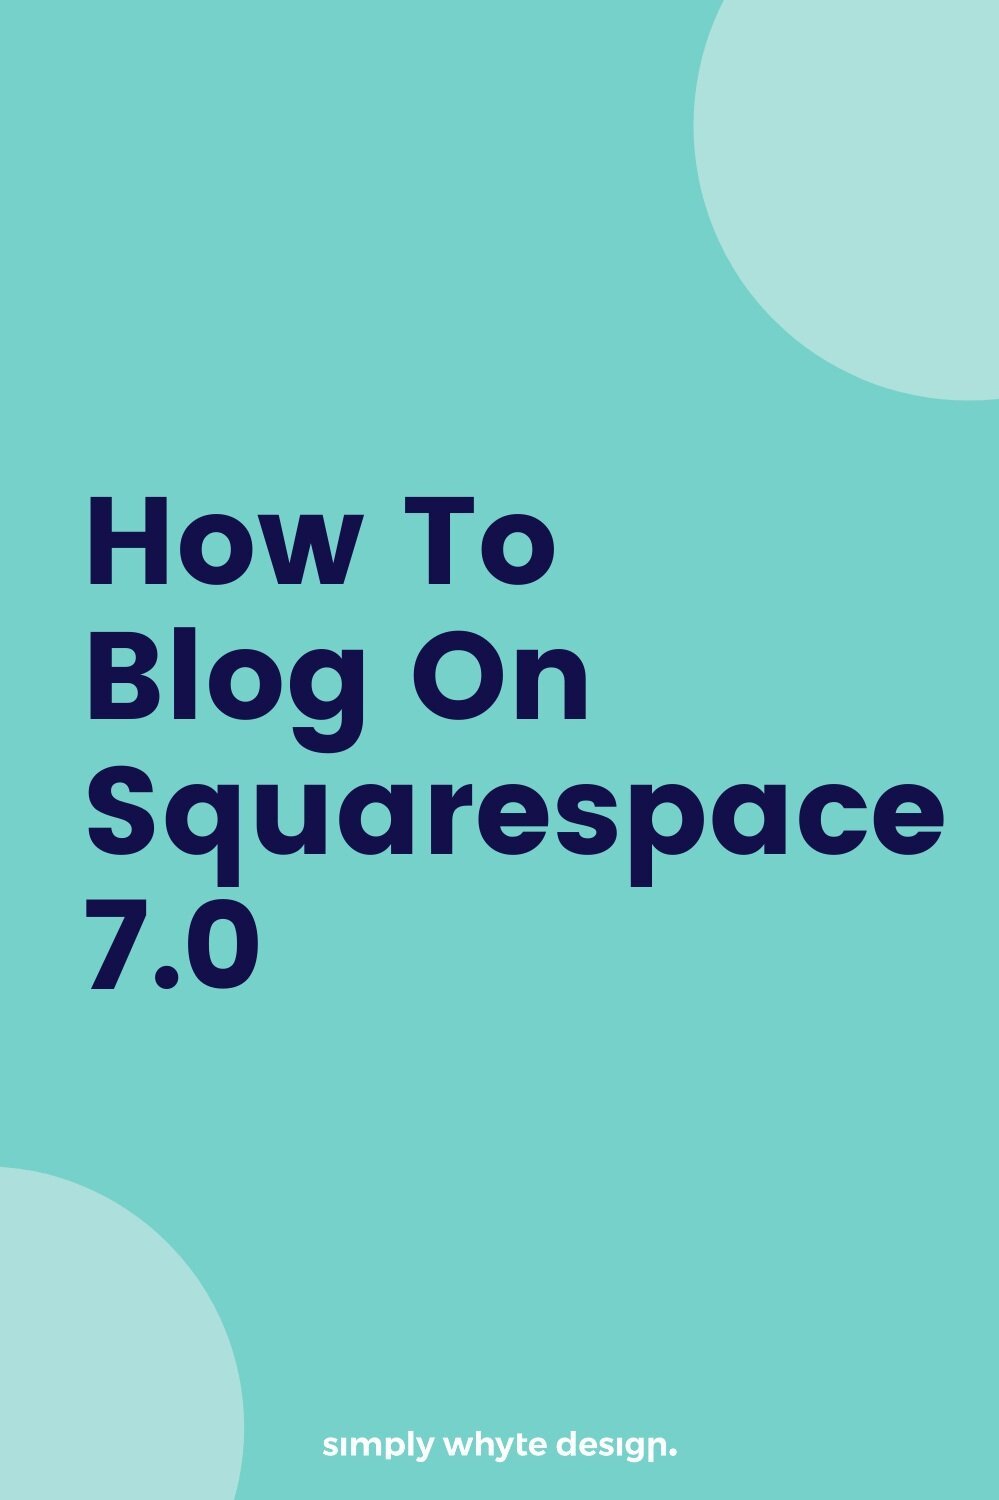 how to blog on squarespace